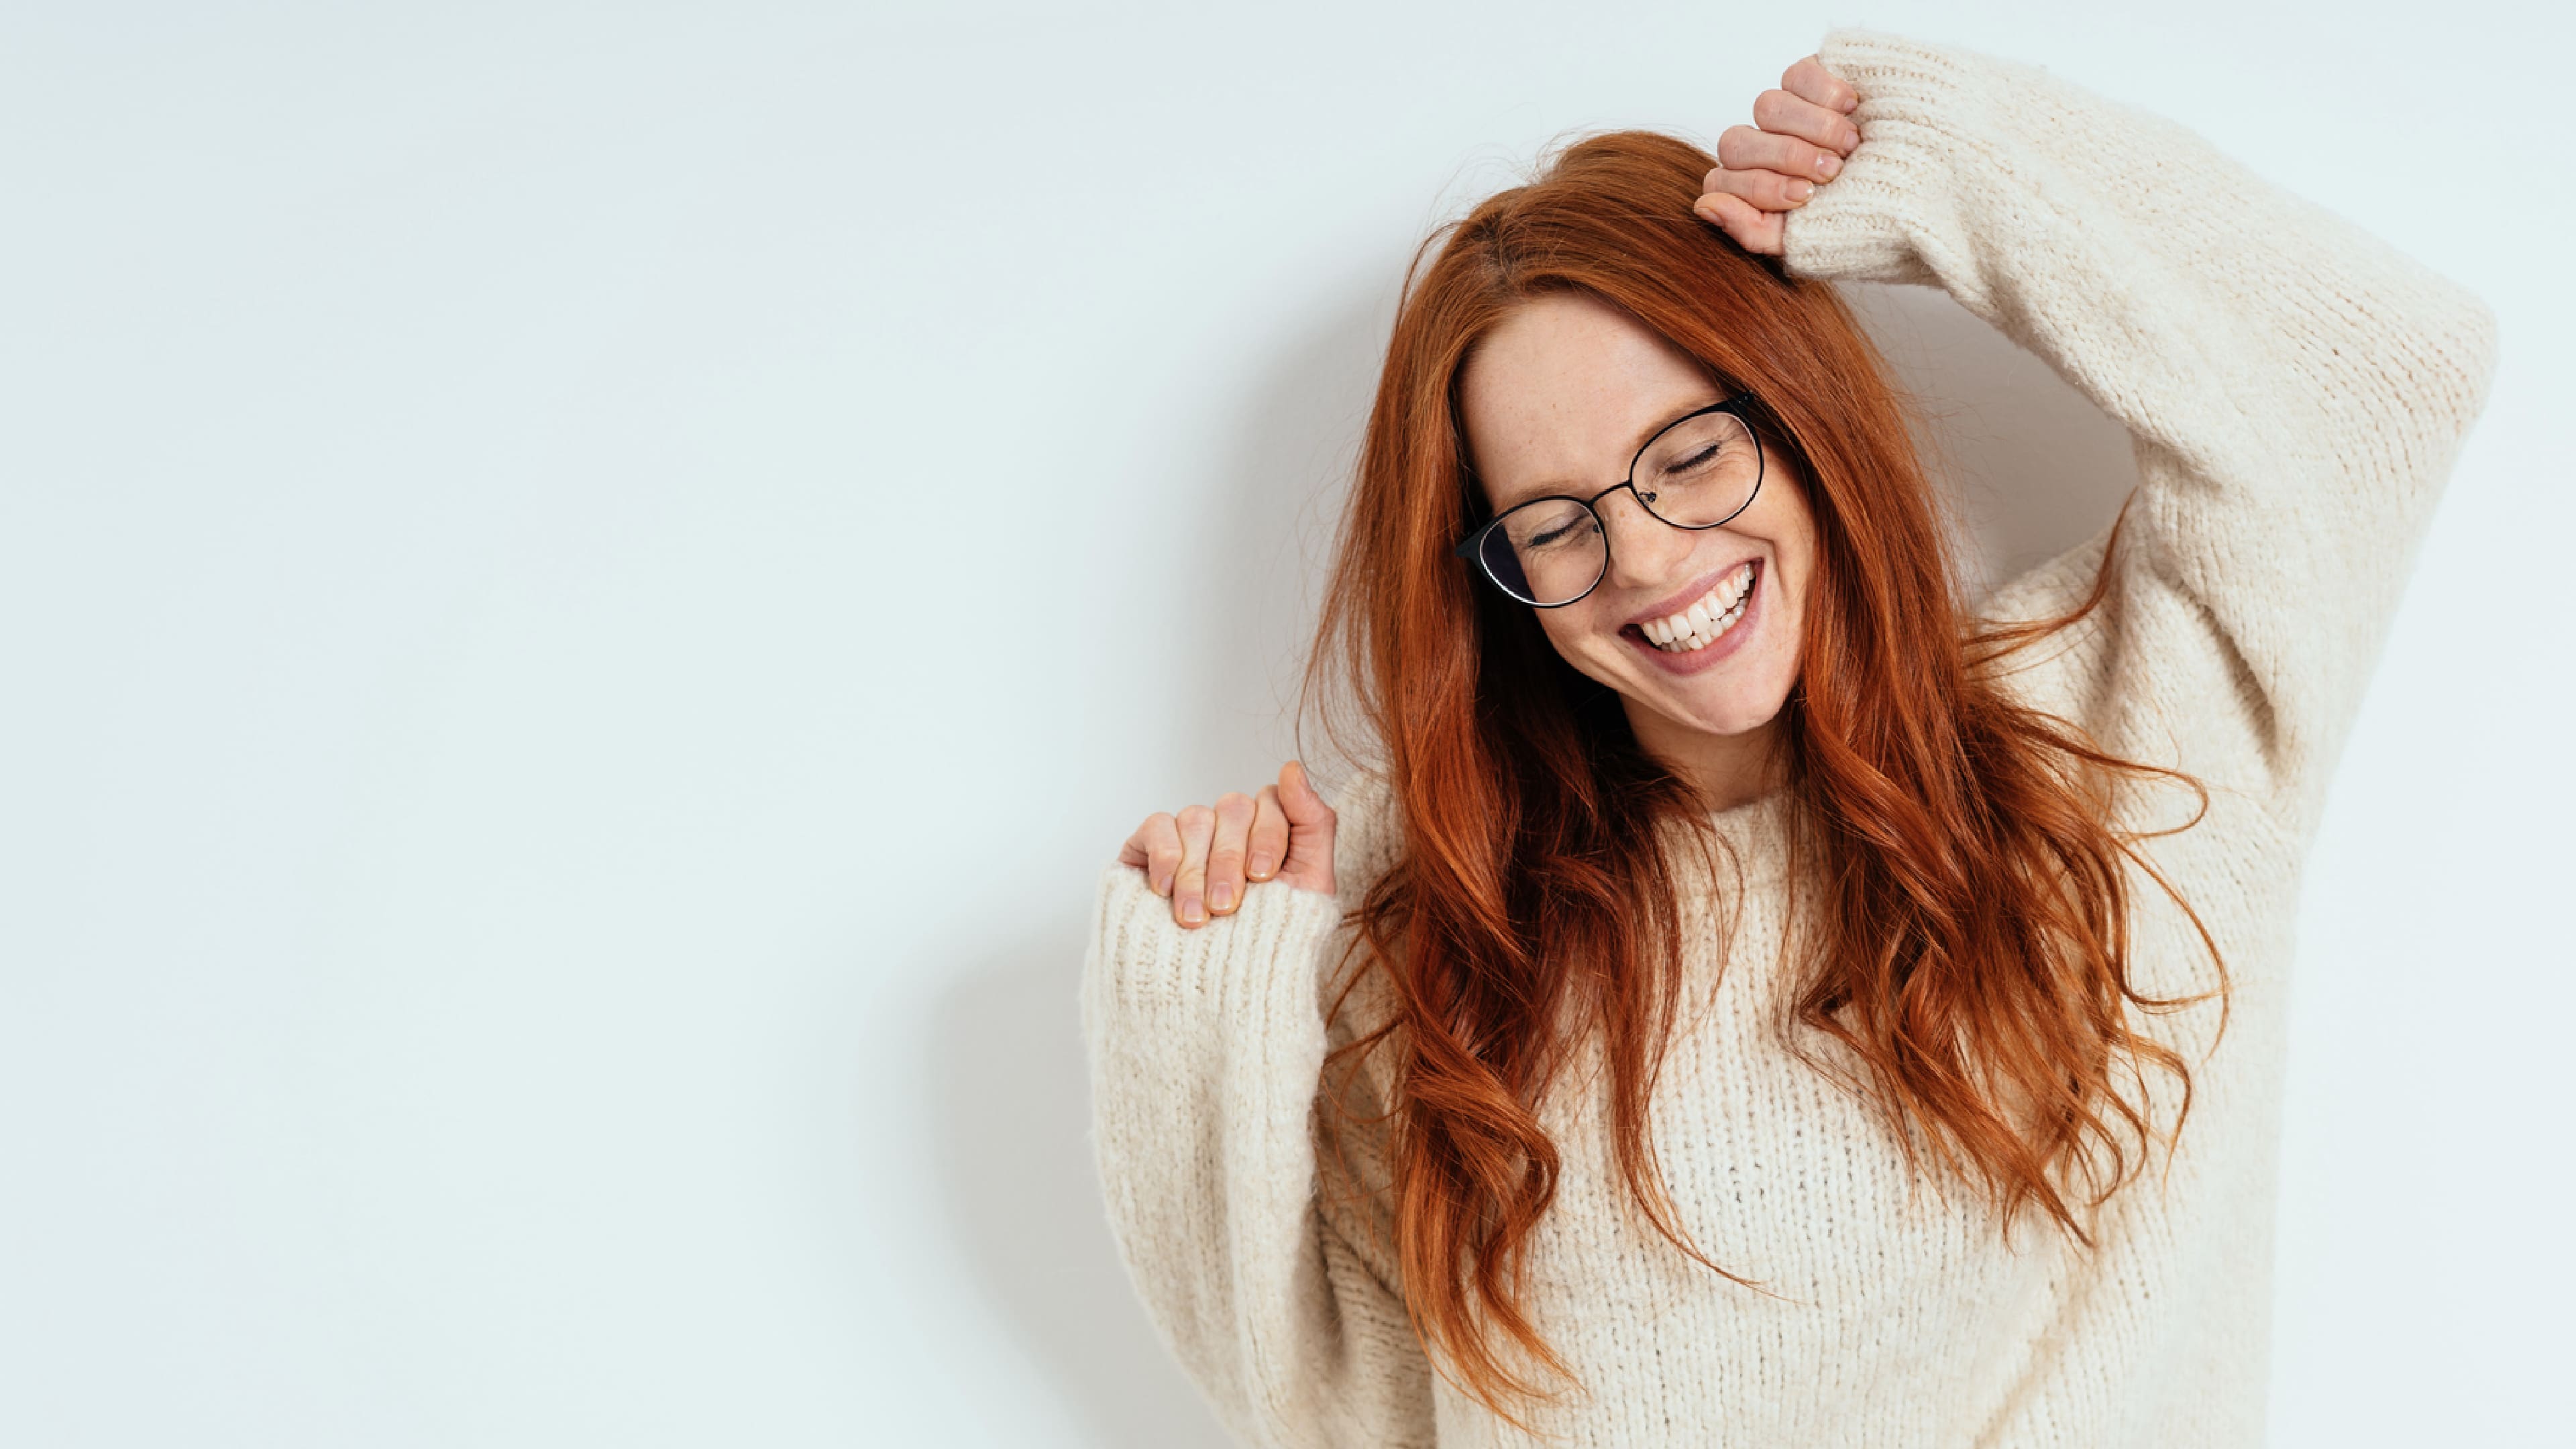  Woman with Glasses Smiling